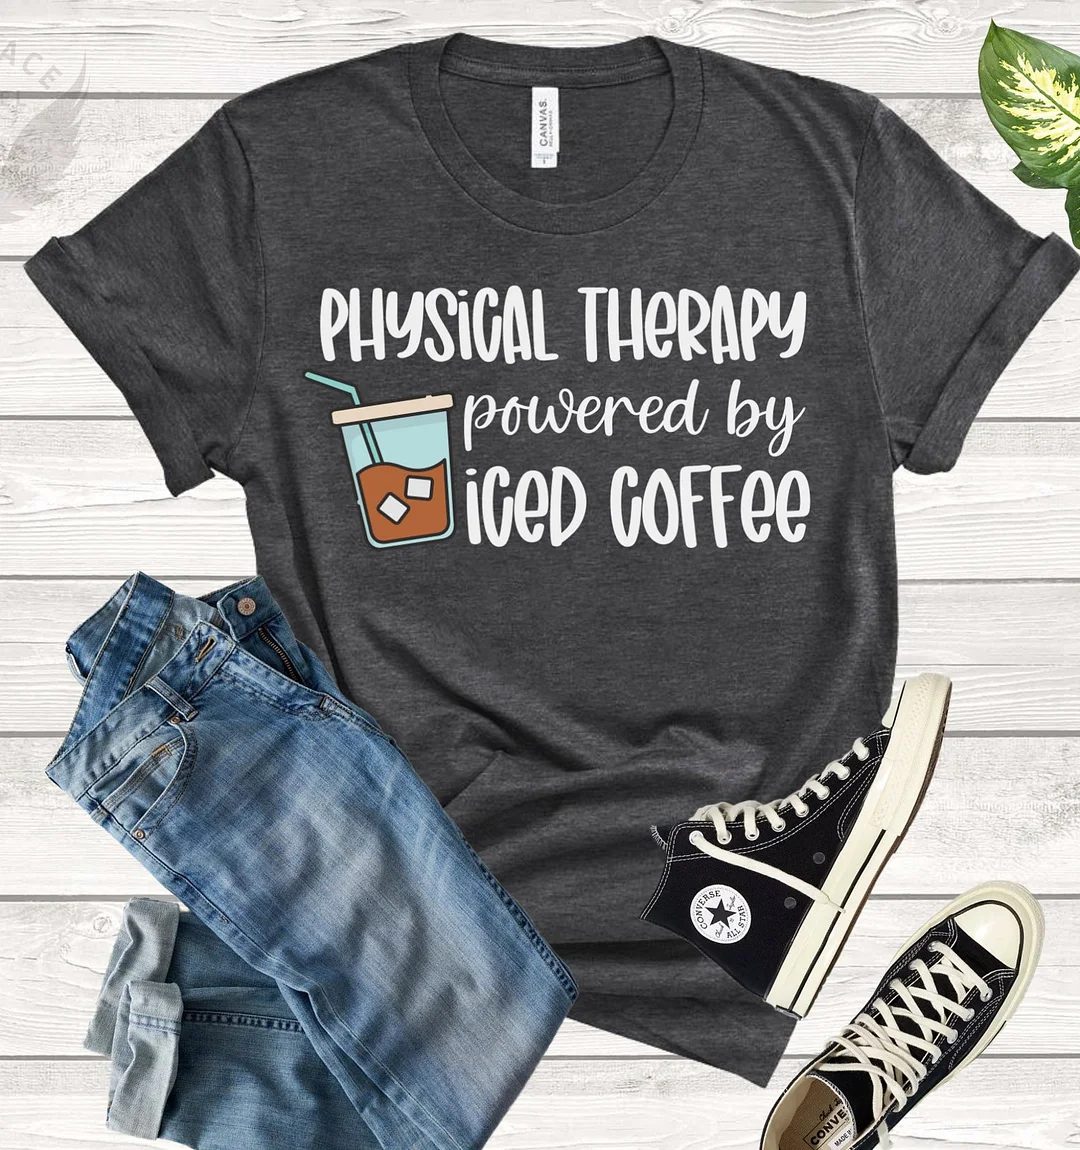 Physical Therapy & Coffee Shirt Therapist Gift Pt Grad Student Physio Pediatric Tee Top